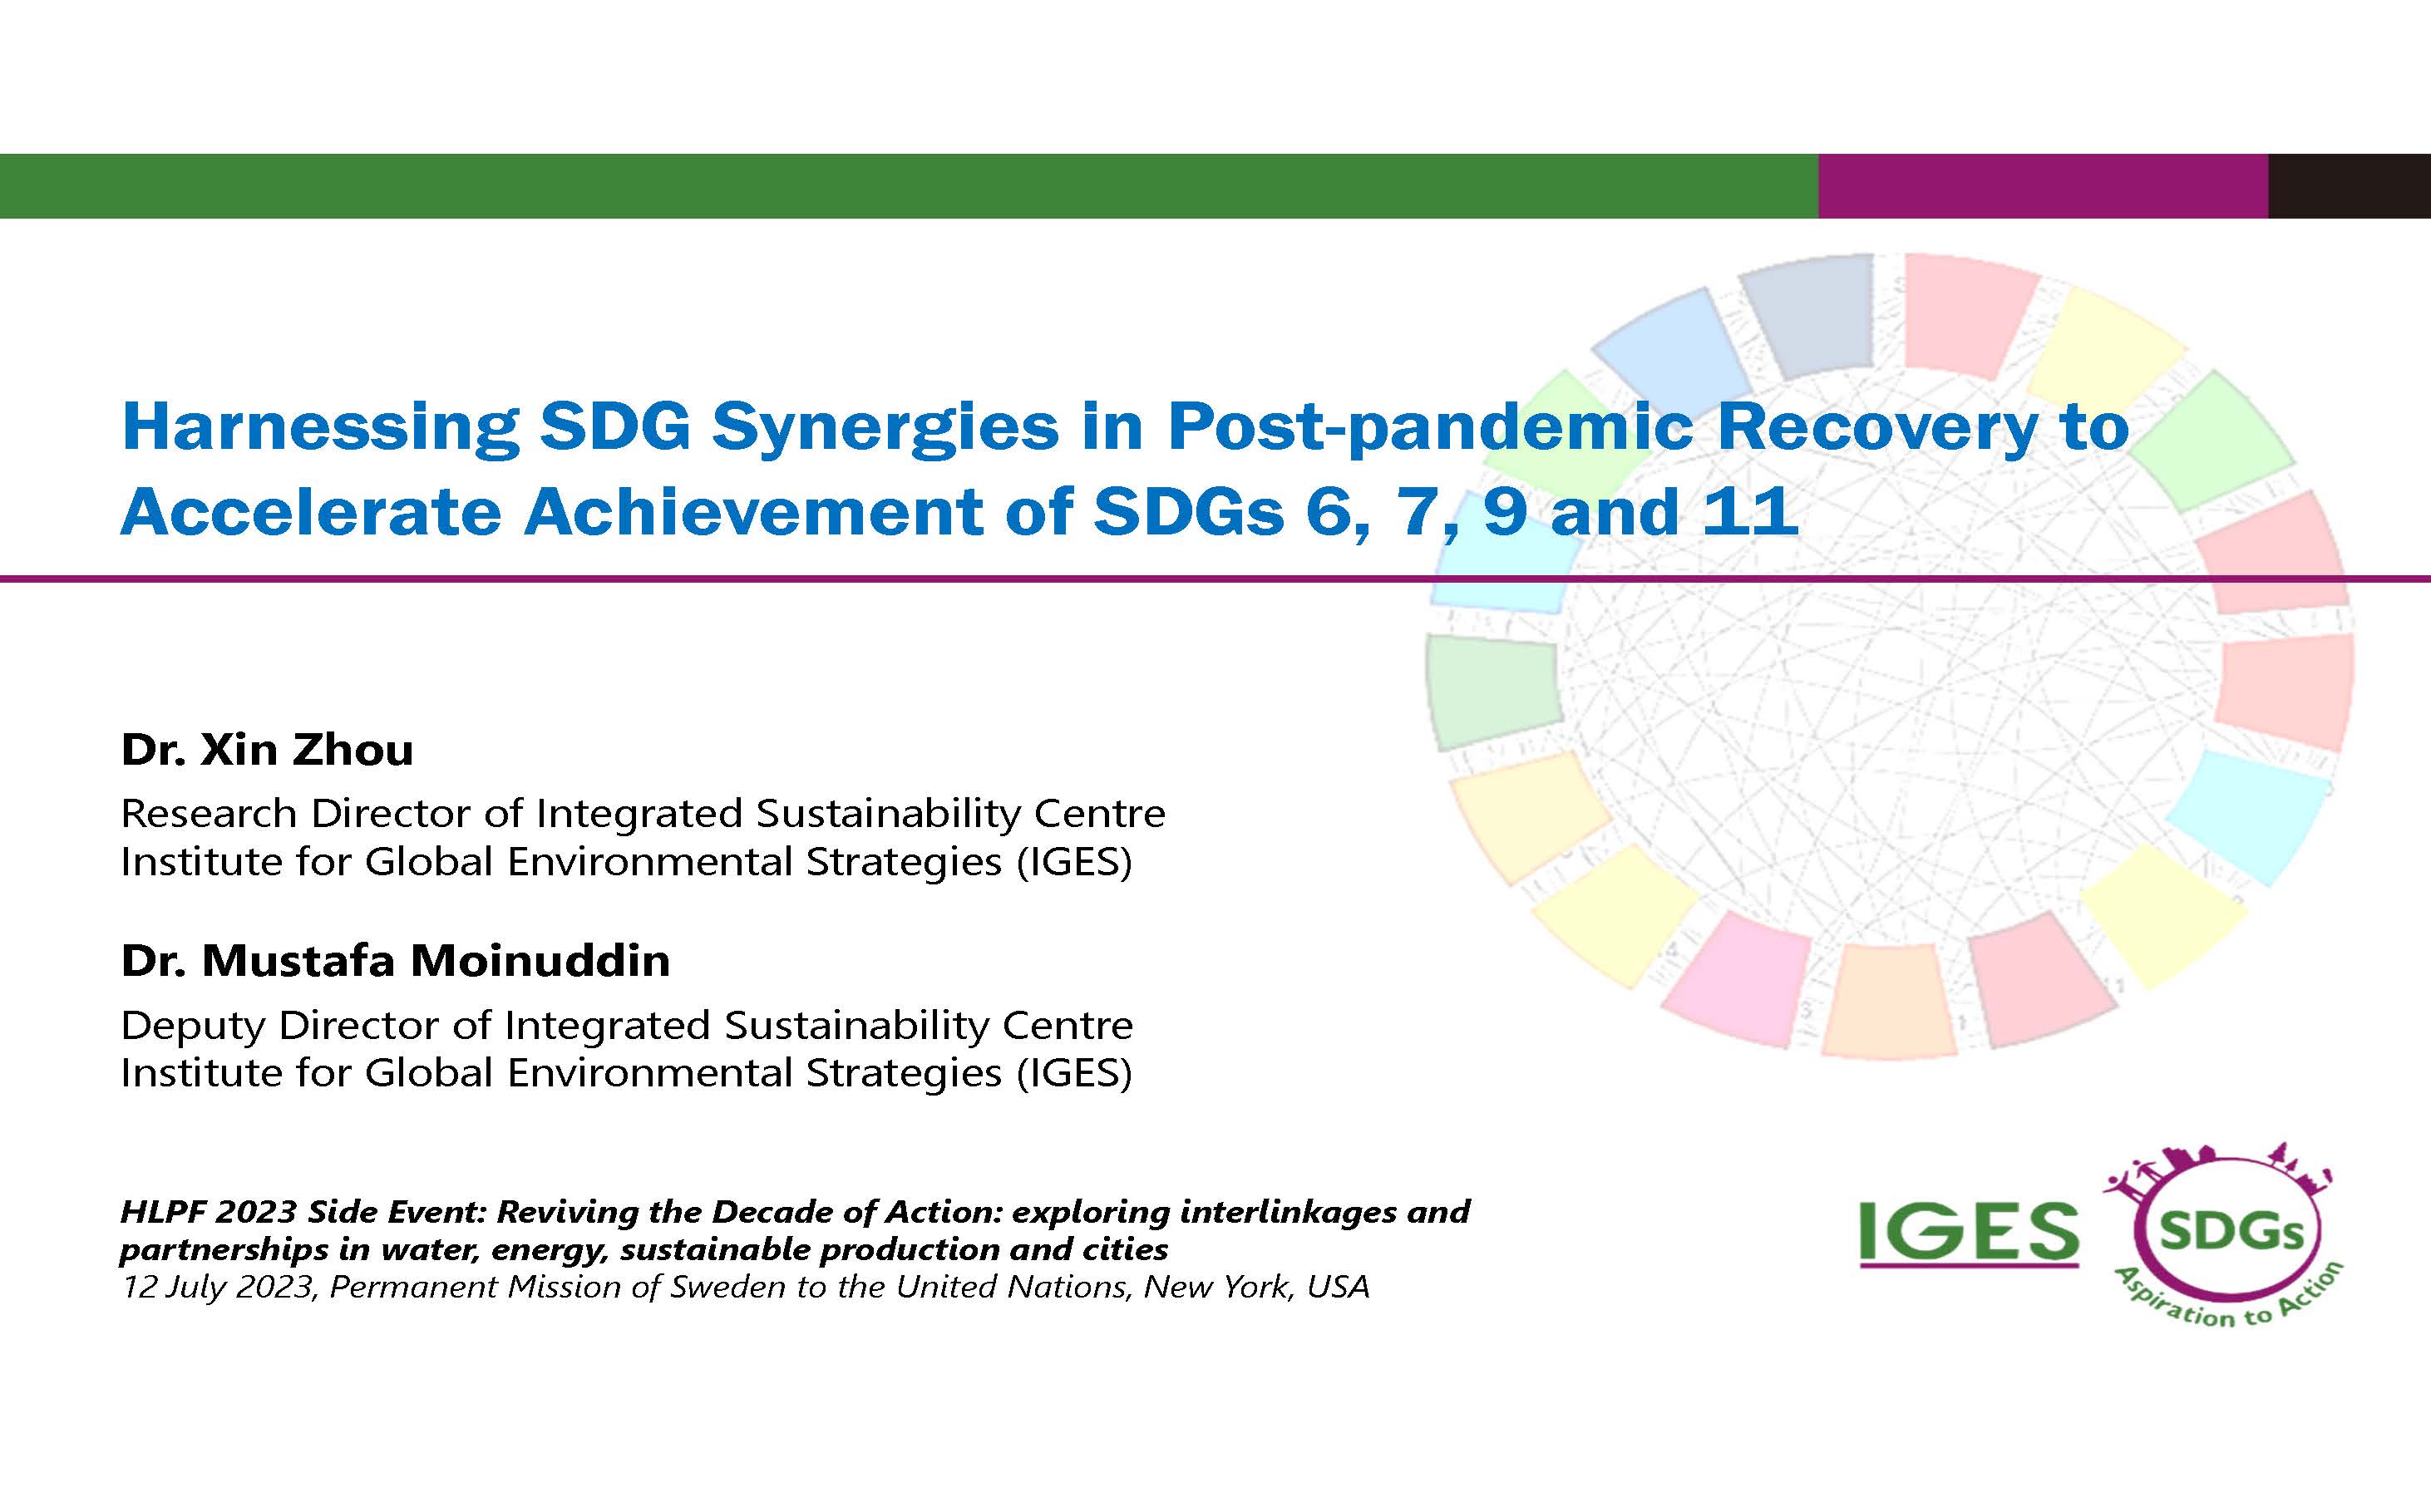 2023 HLPF_Side Event_Interlinkages_Harnessing Synergies_SDGs 6, 7, 9 and 11